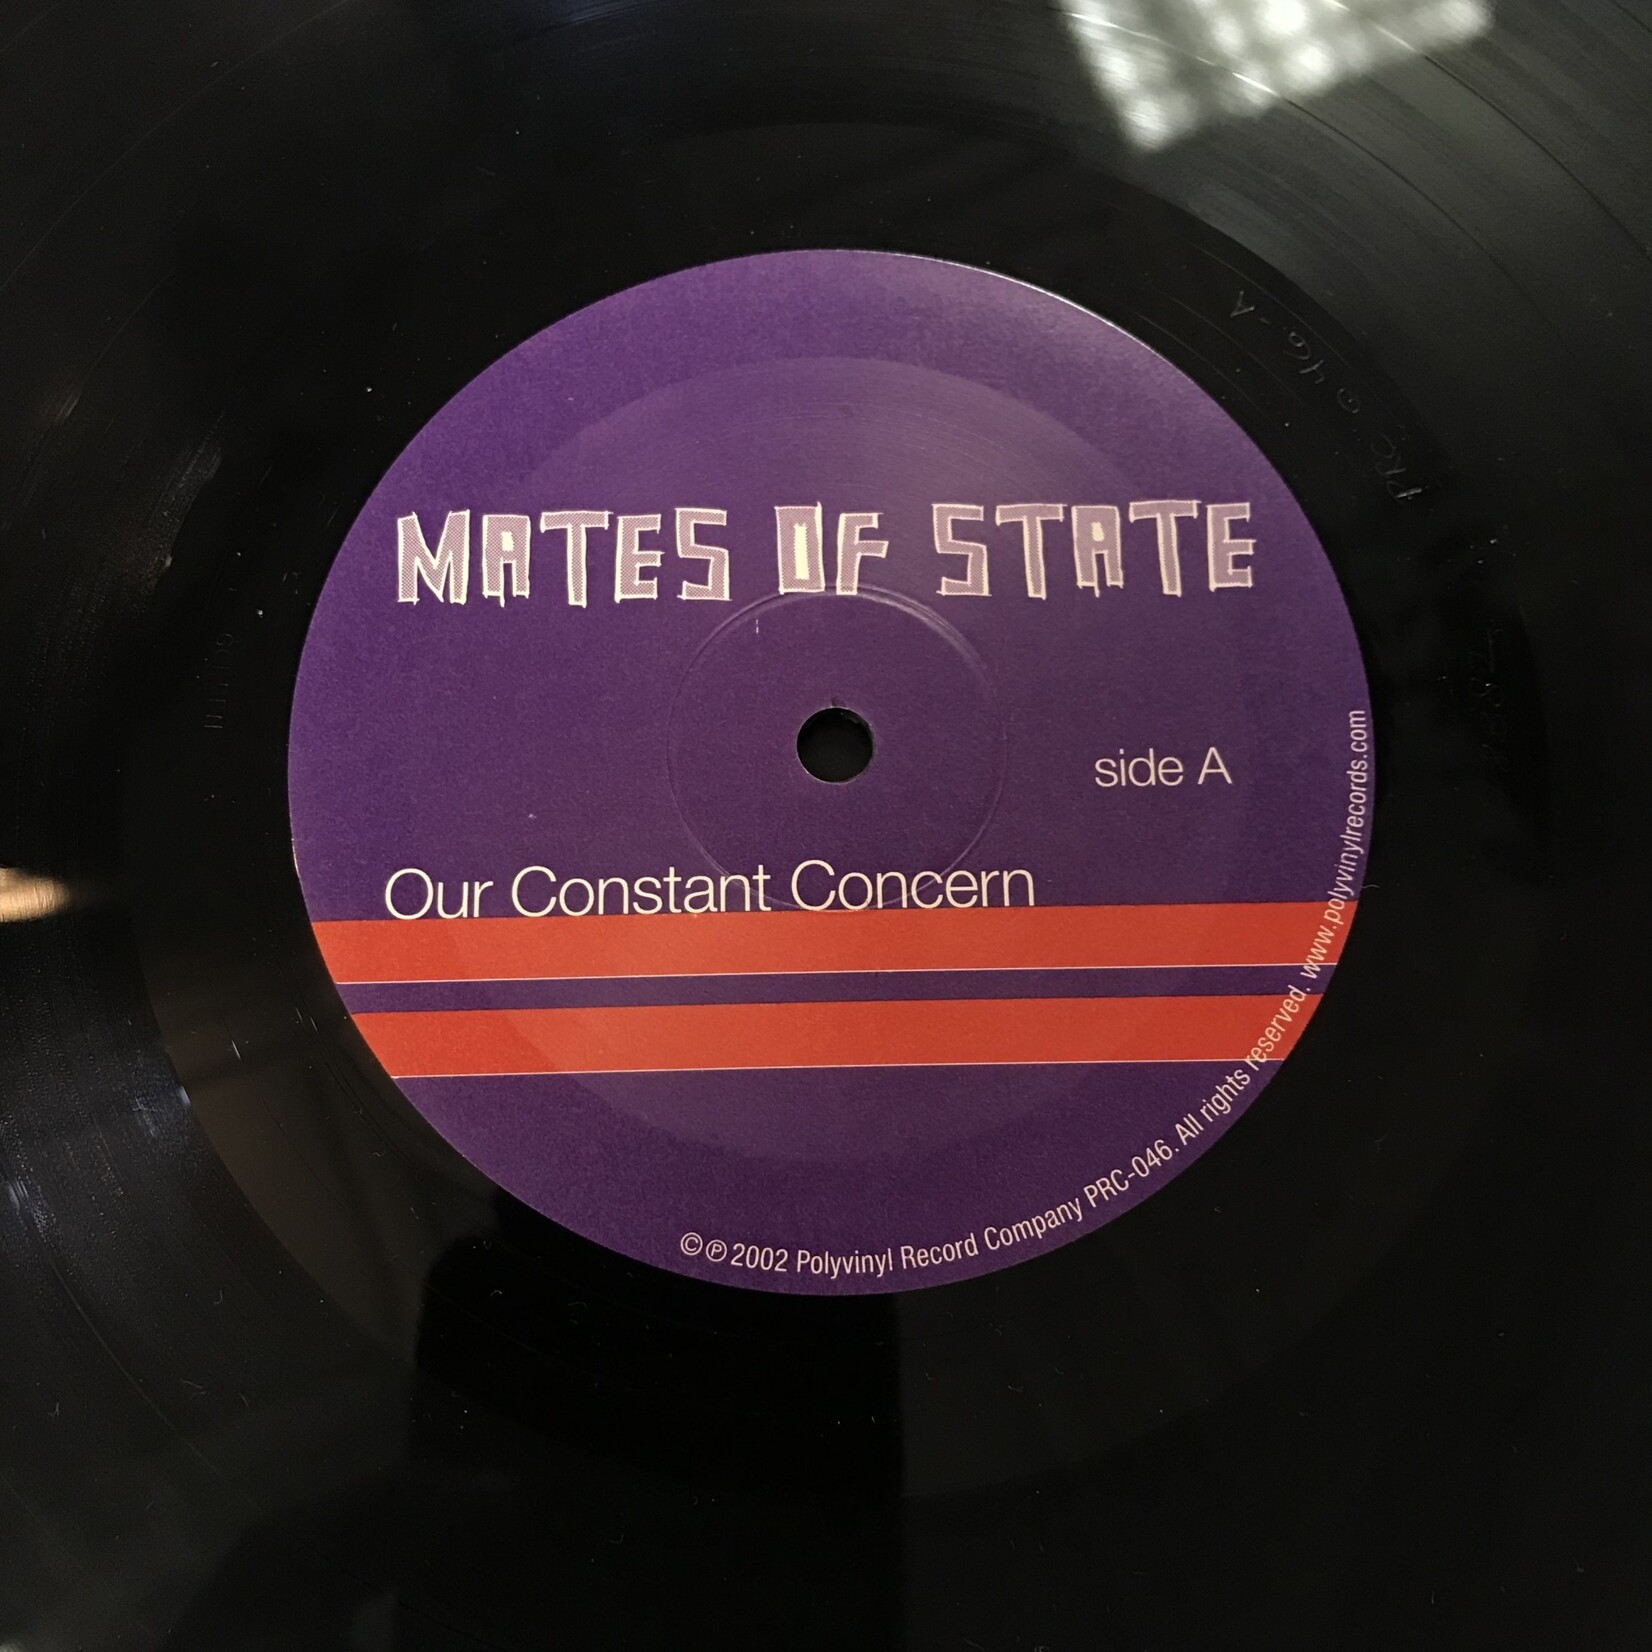 Mates Of State - Our Constant Concern - PRC 046 - Vinyl LP (USED)